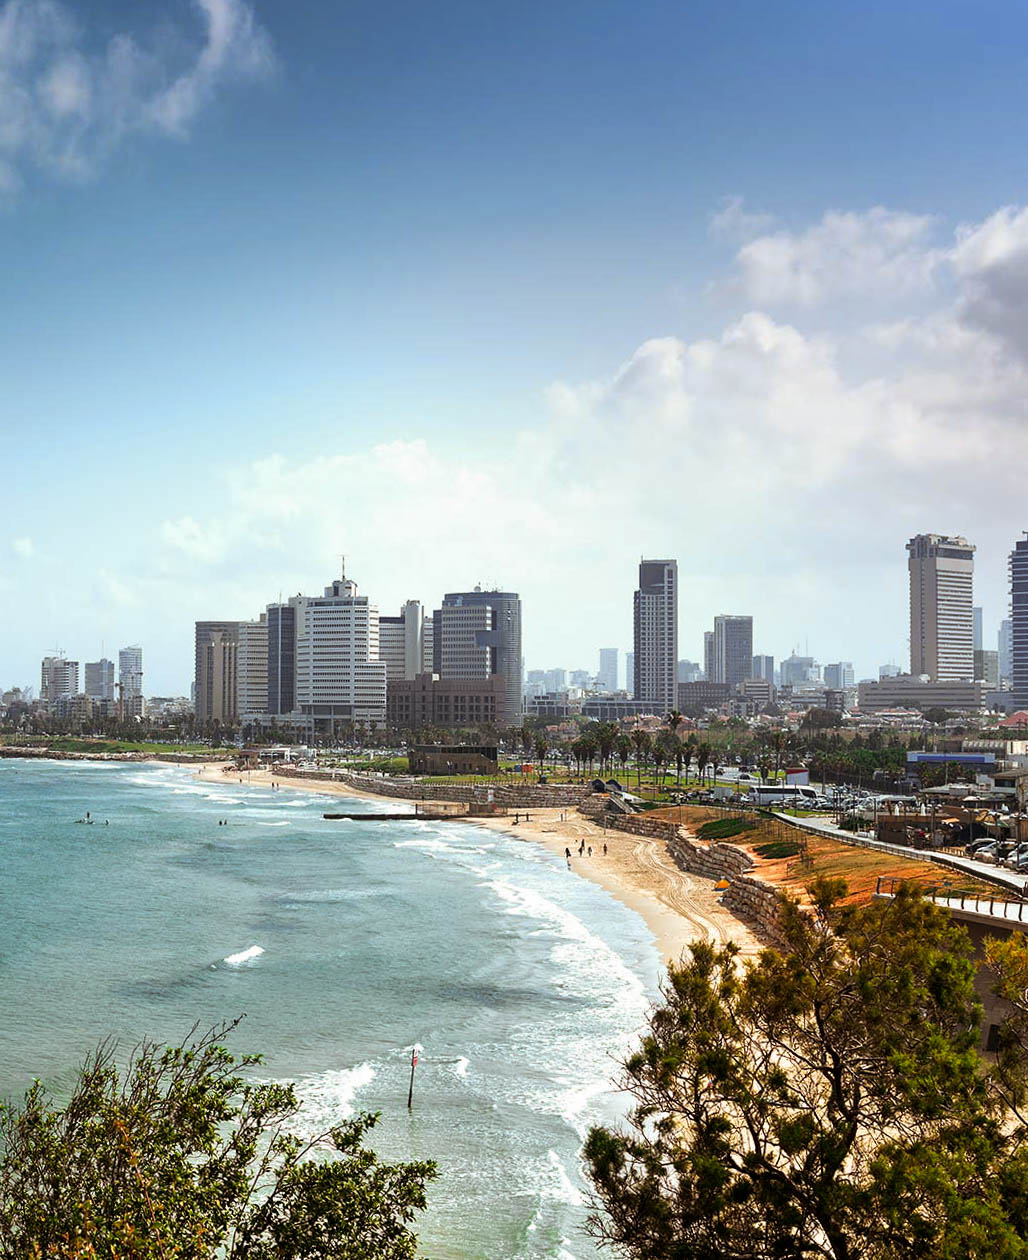 The city of Netanya viewed from above.